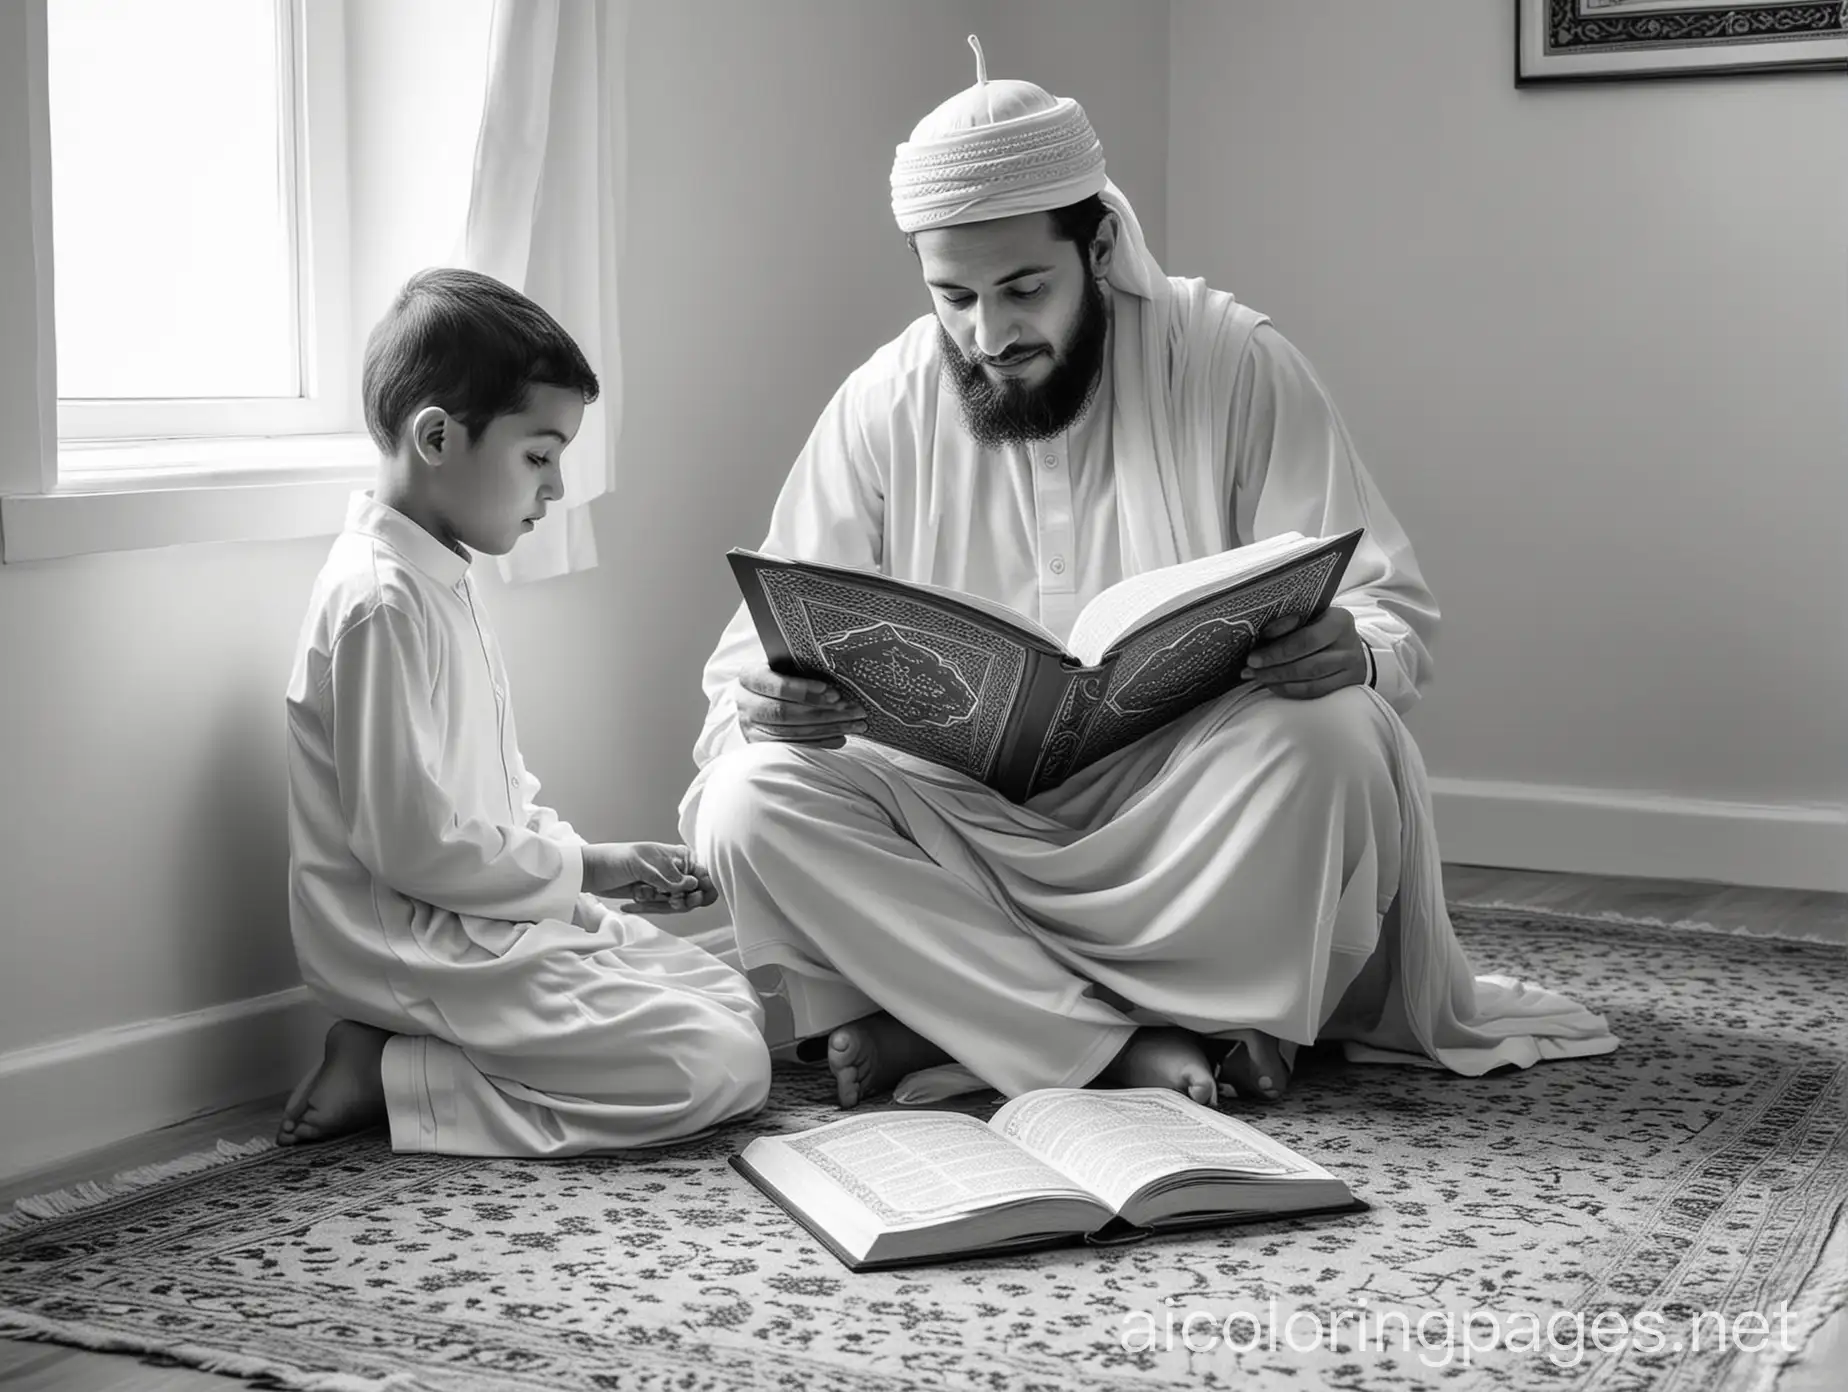 Islamic-Healing-Man-Reading-Quran-to-Ailing-Child-in-Home-Setting